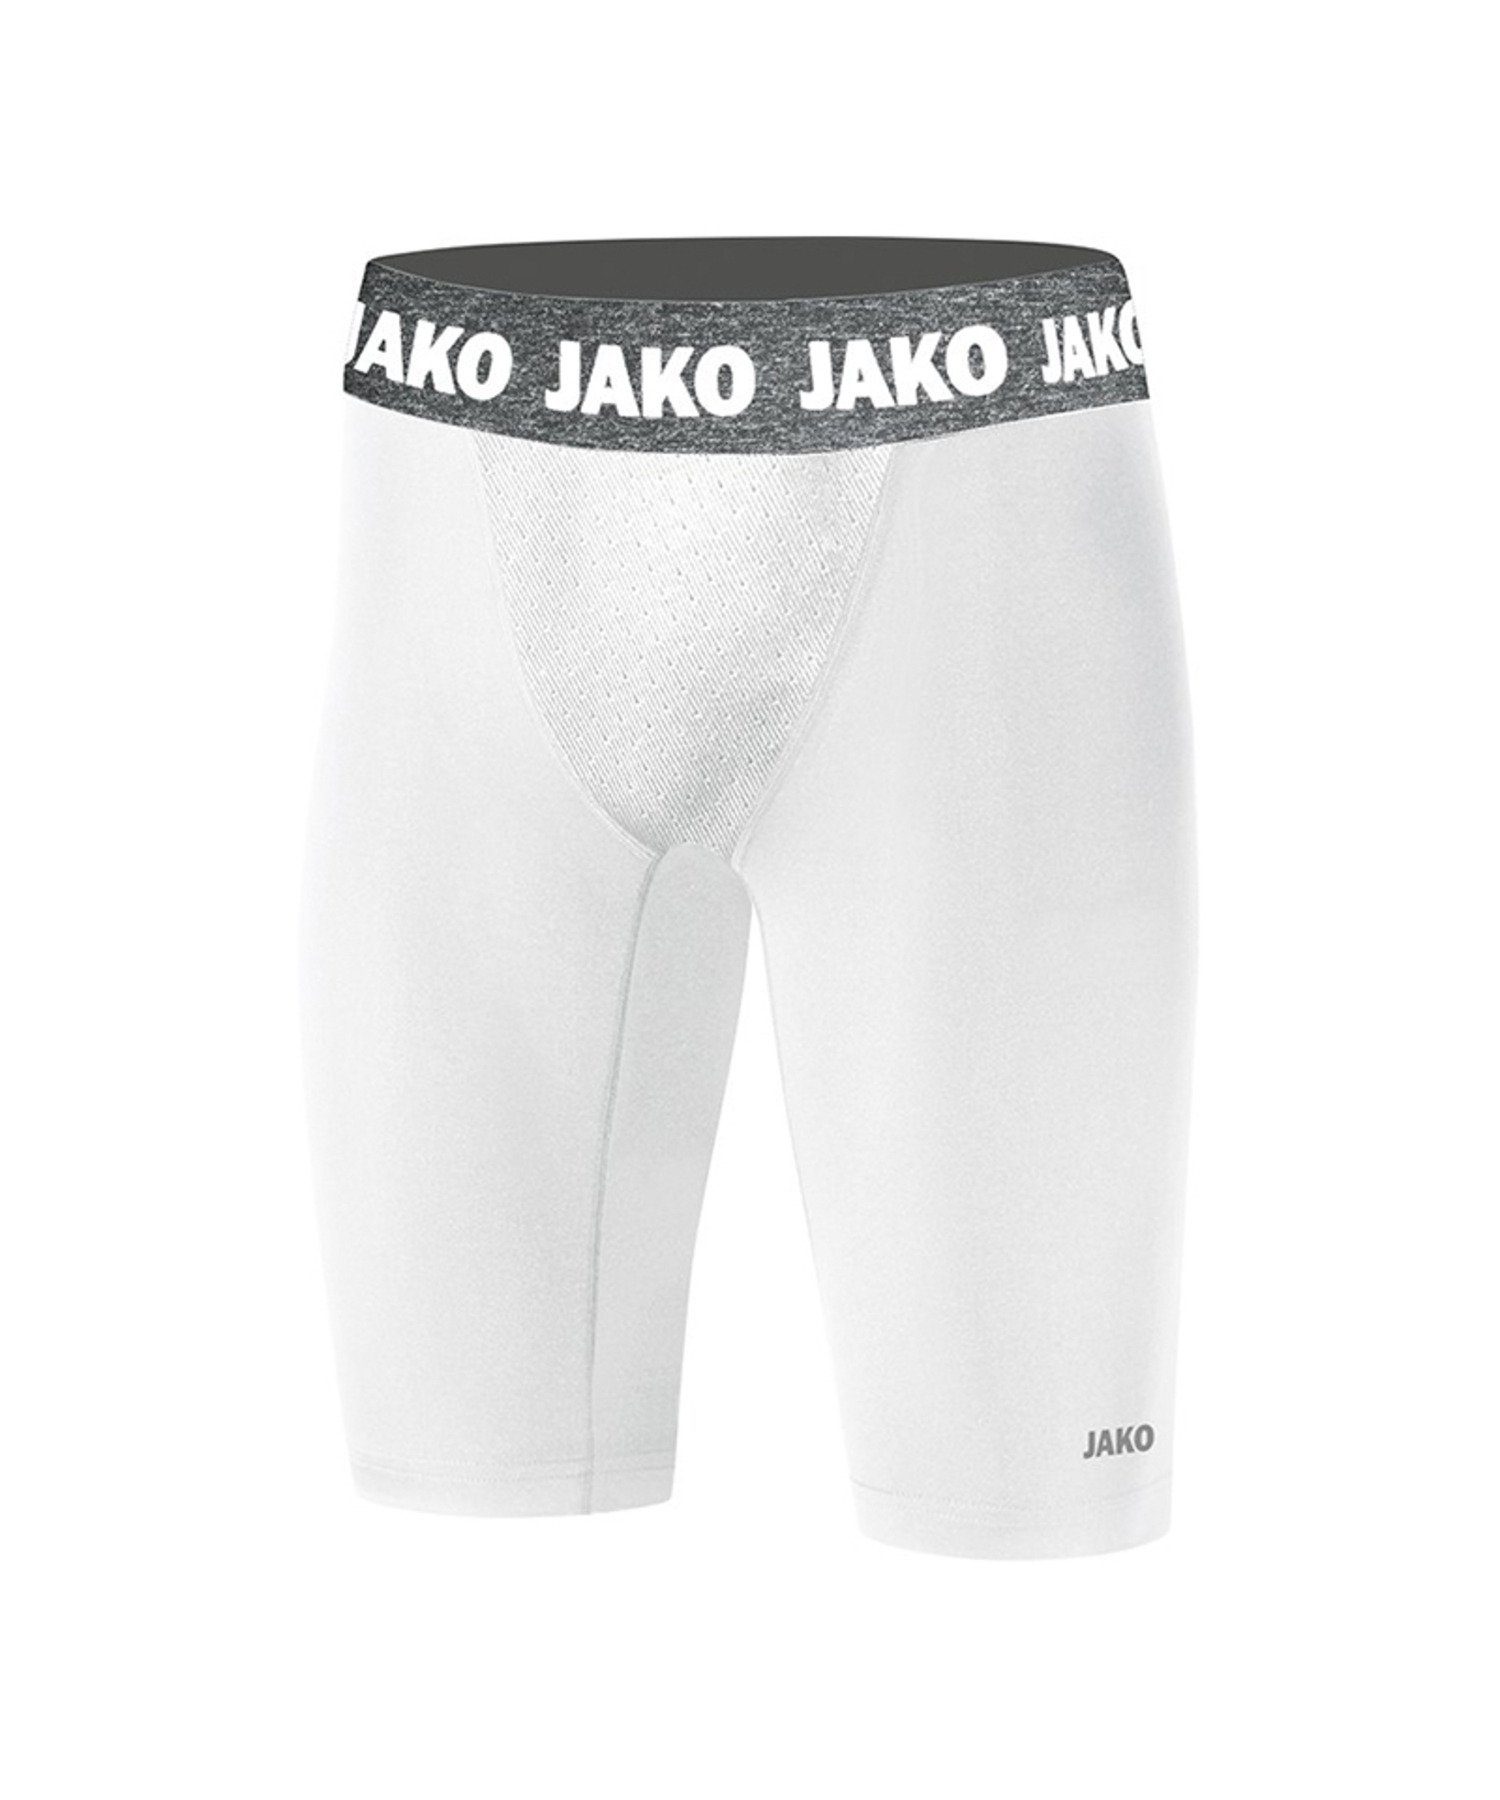 Short Funktionshose Tight weiss Compression 2.0 Jako